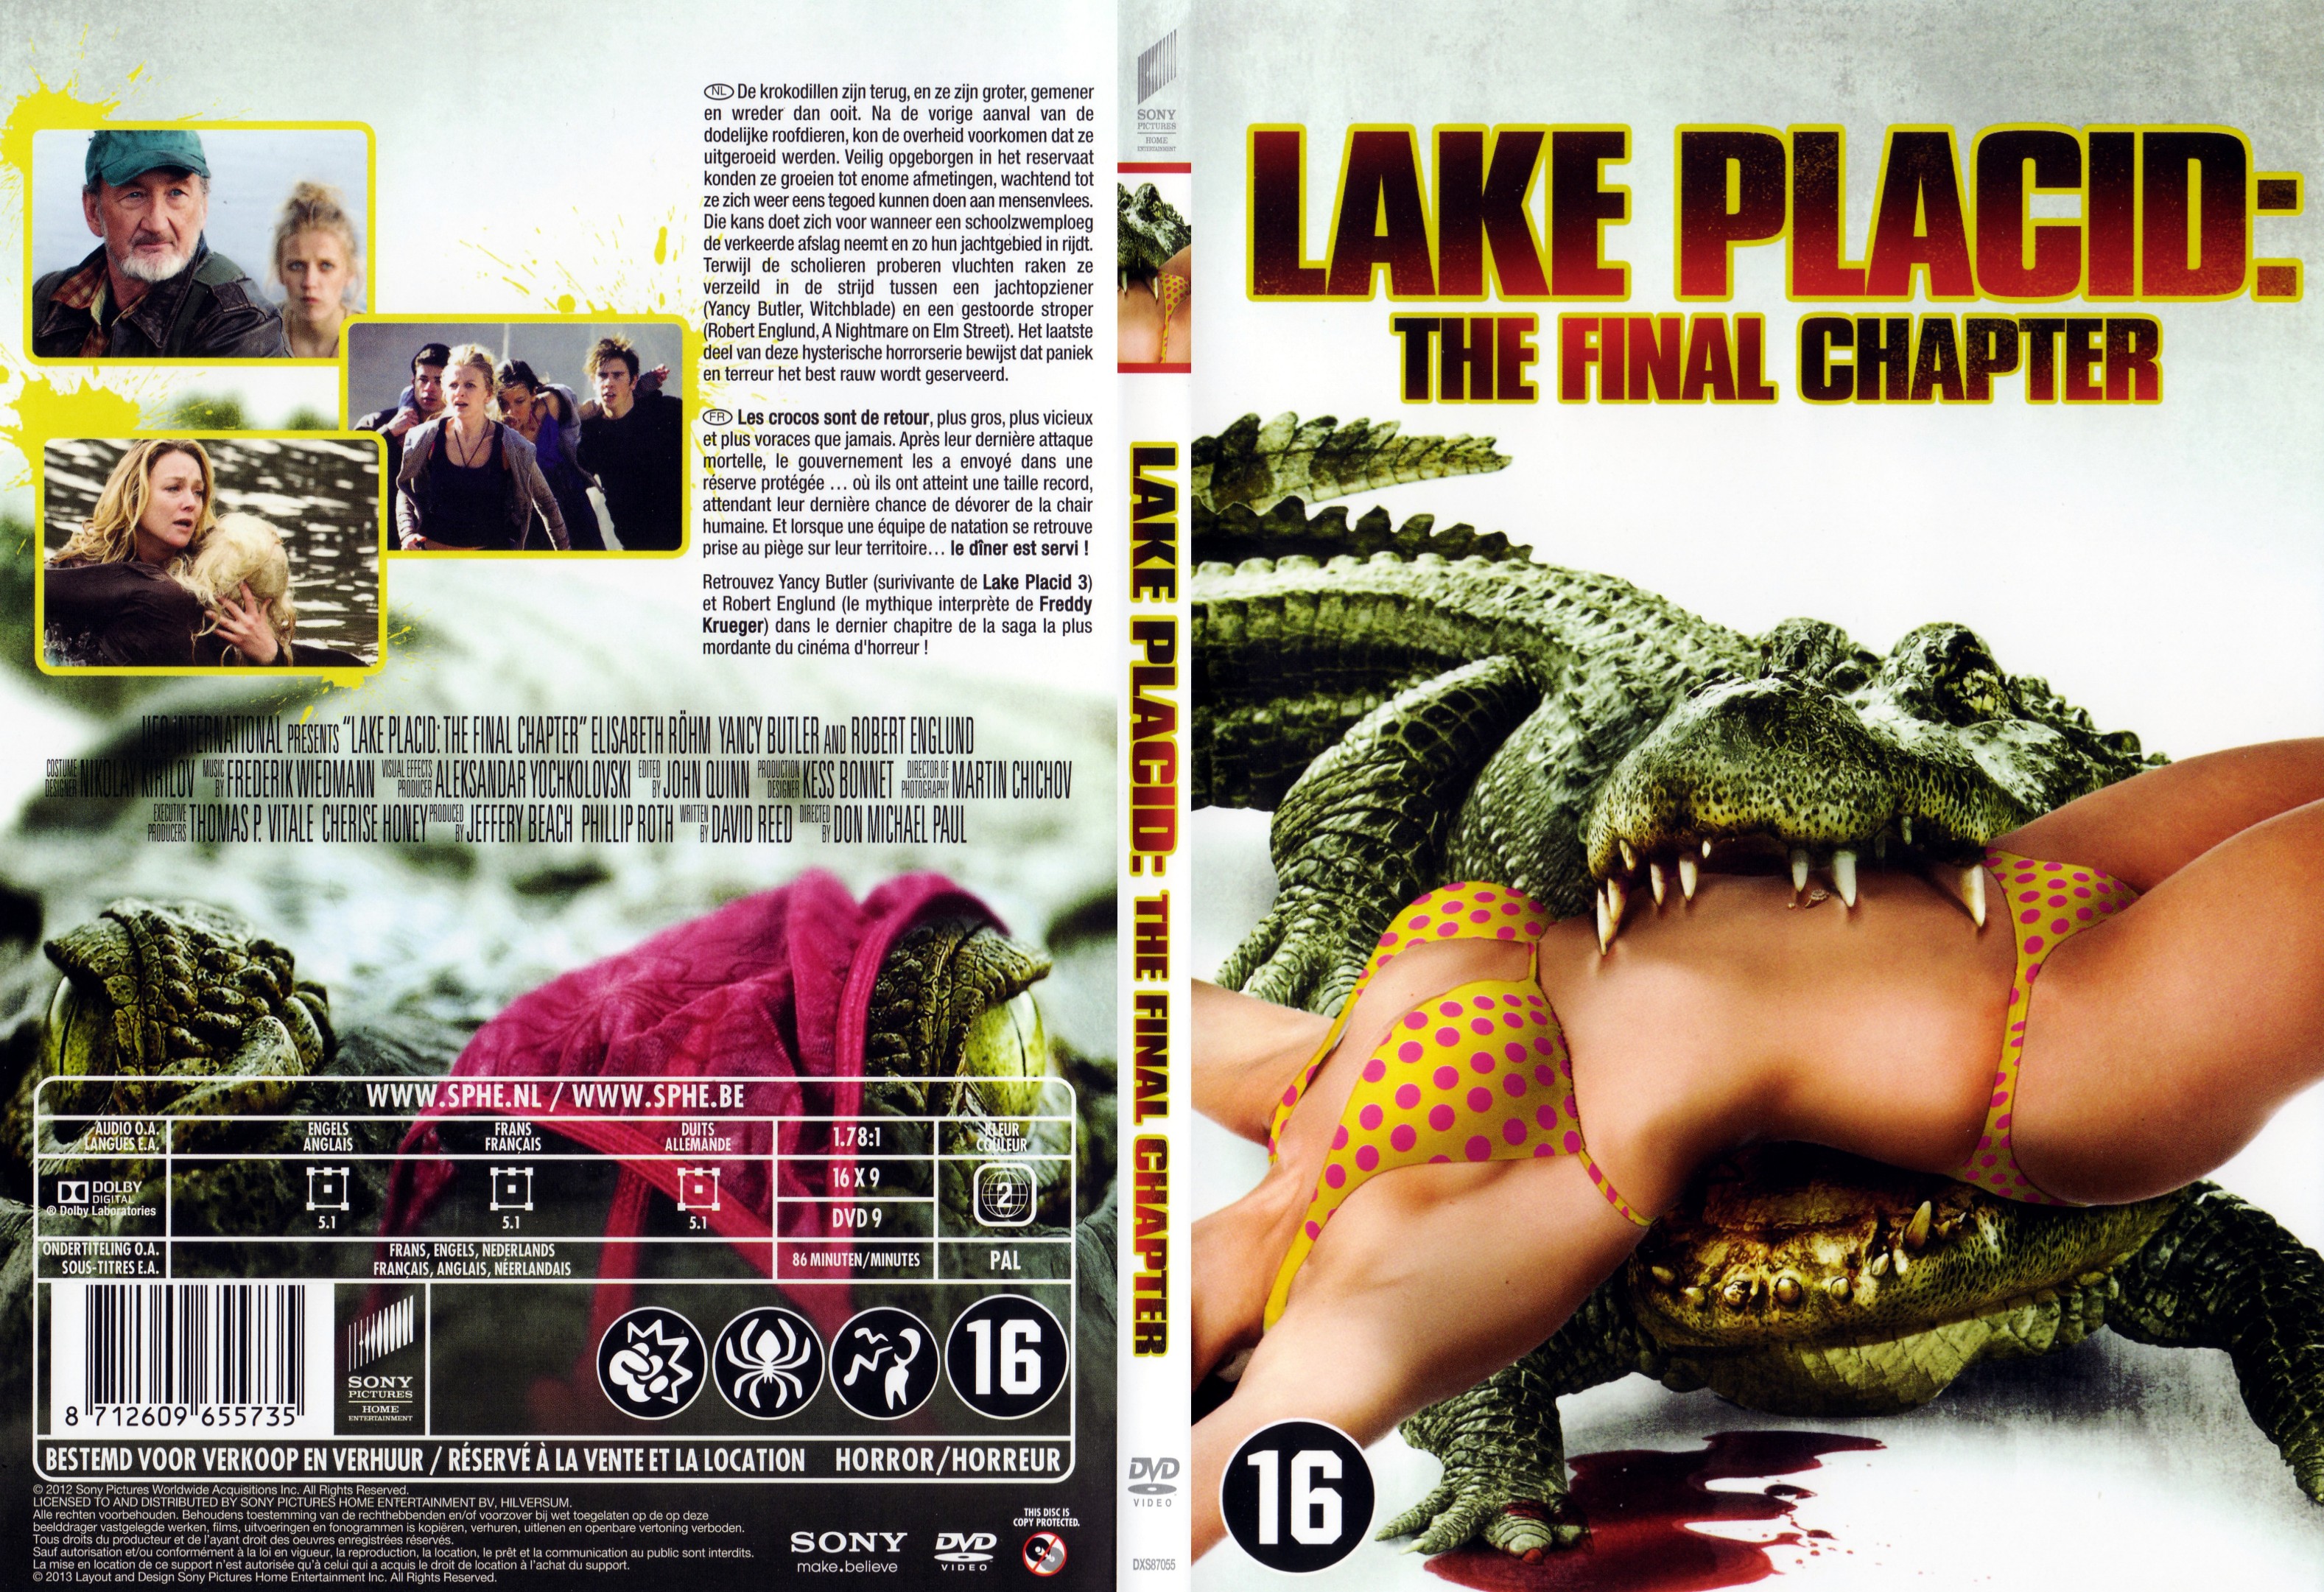 Jaquette DVD Lake Placid - The final chapter - SLIM